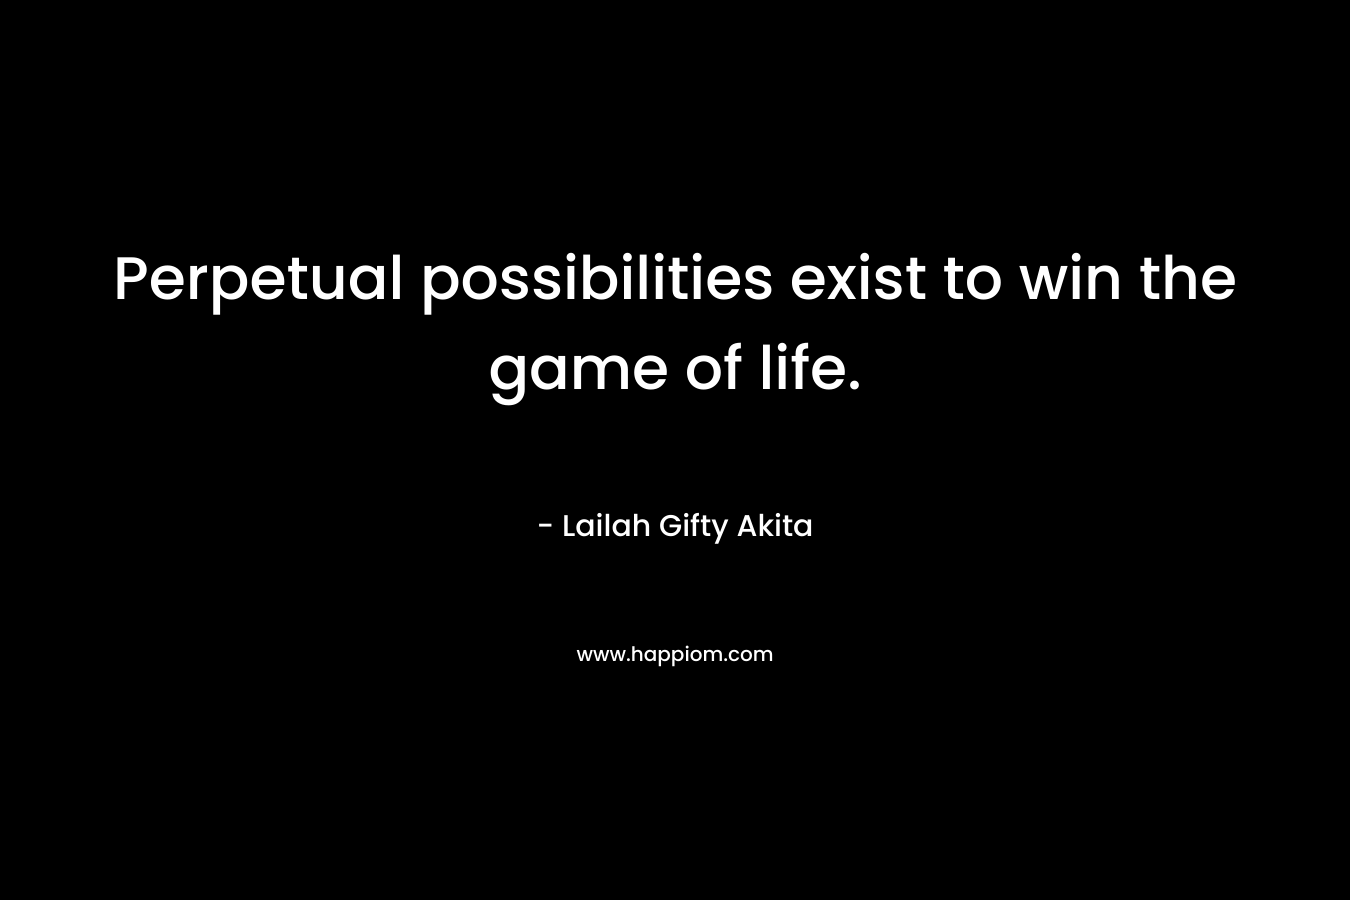 Perpetual possibilities exist to win the game of life.